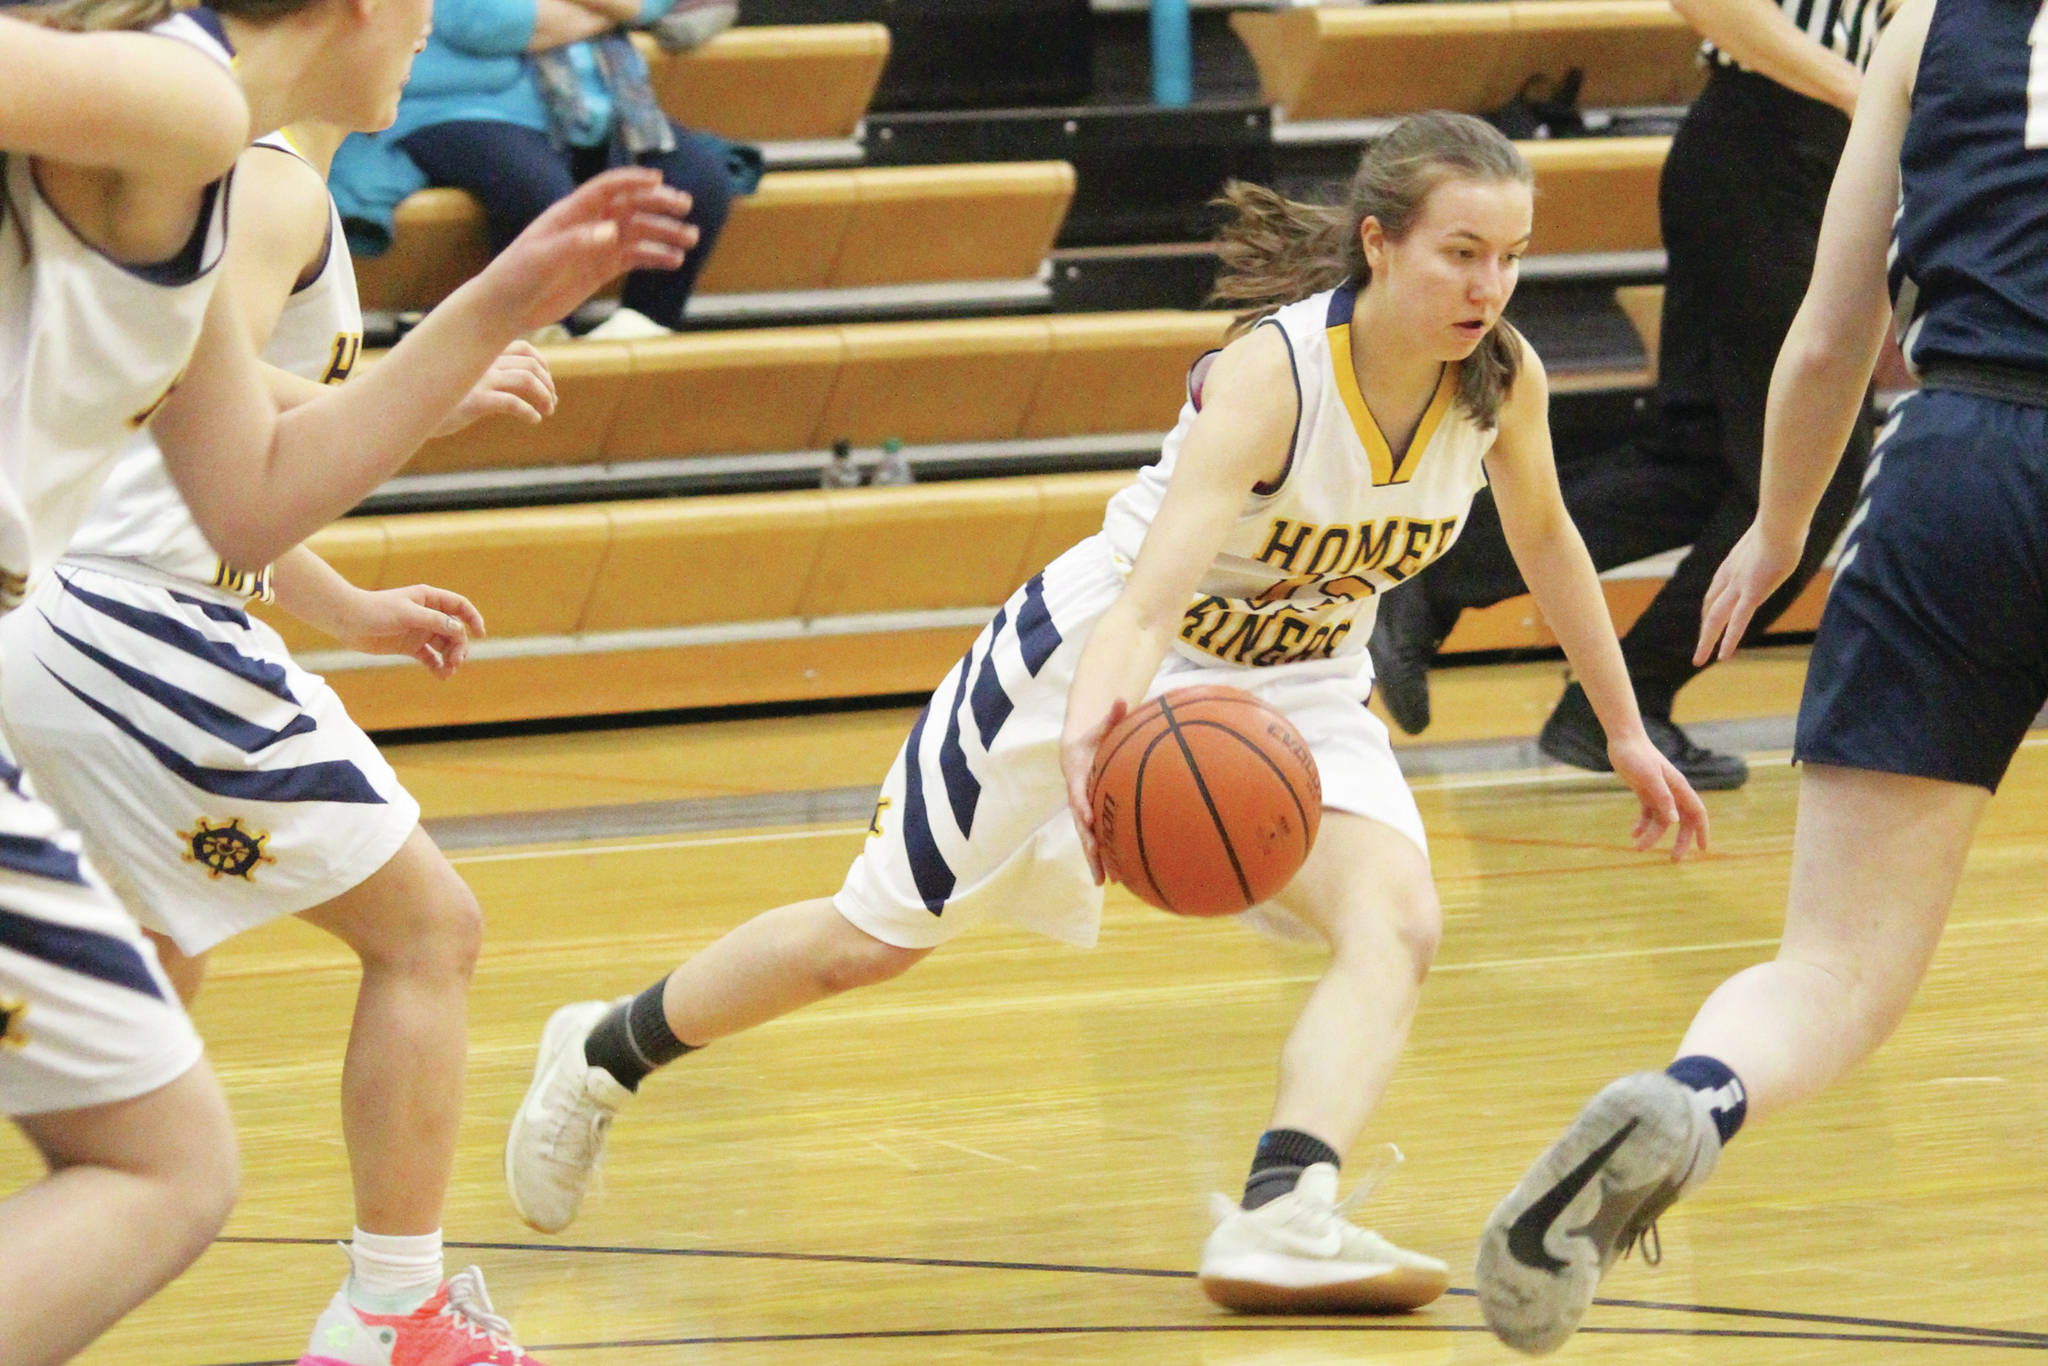 Homer’s Kappa Reutov gets a turnover during a Tuesday, Feb. 25, 2020 basketball game against Soldotna High School in the Alice Witte Gymnasium in Homer, Alaska. (Photo by Megan Pacer/Homer News)